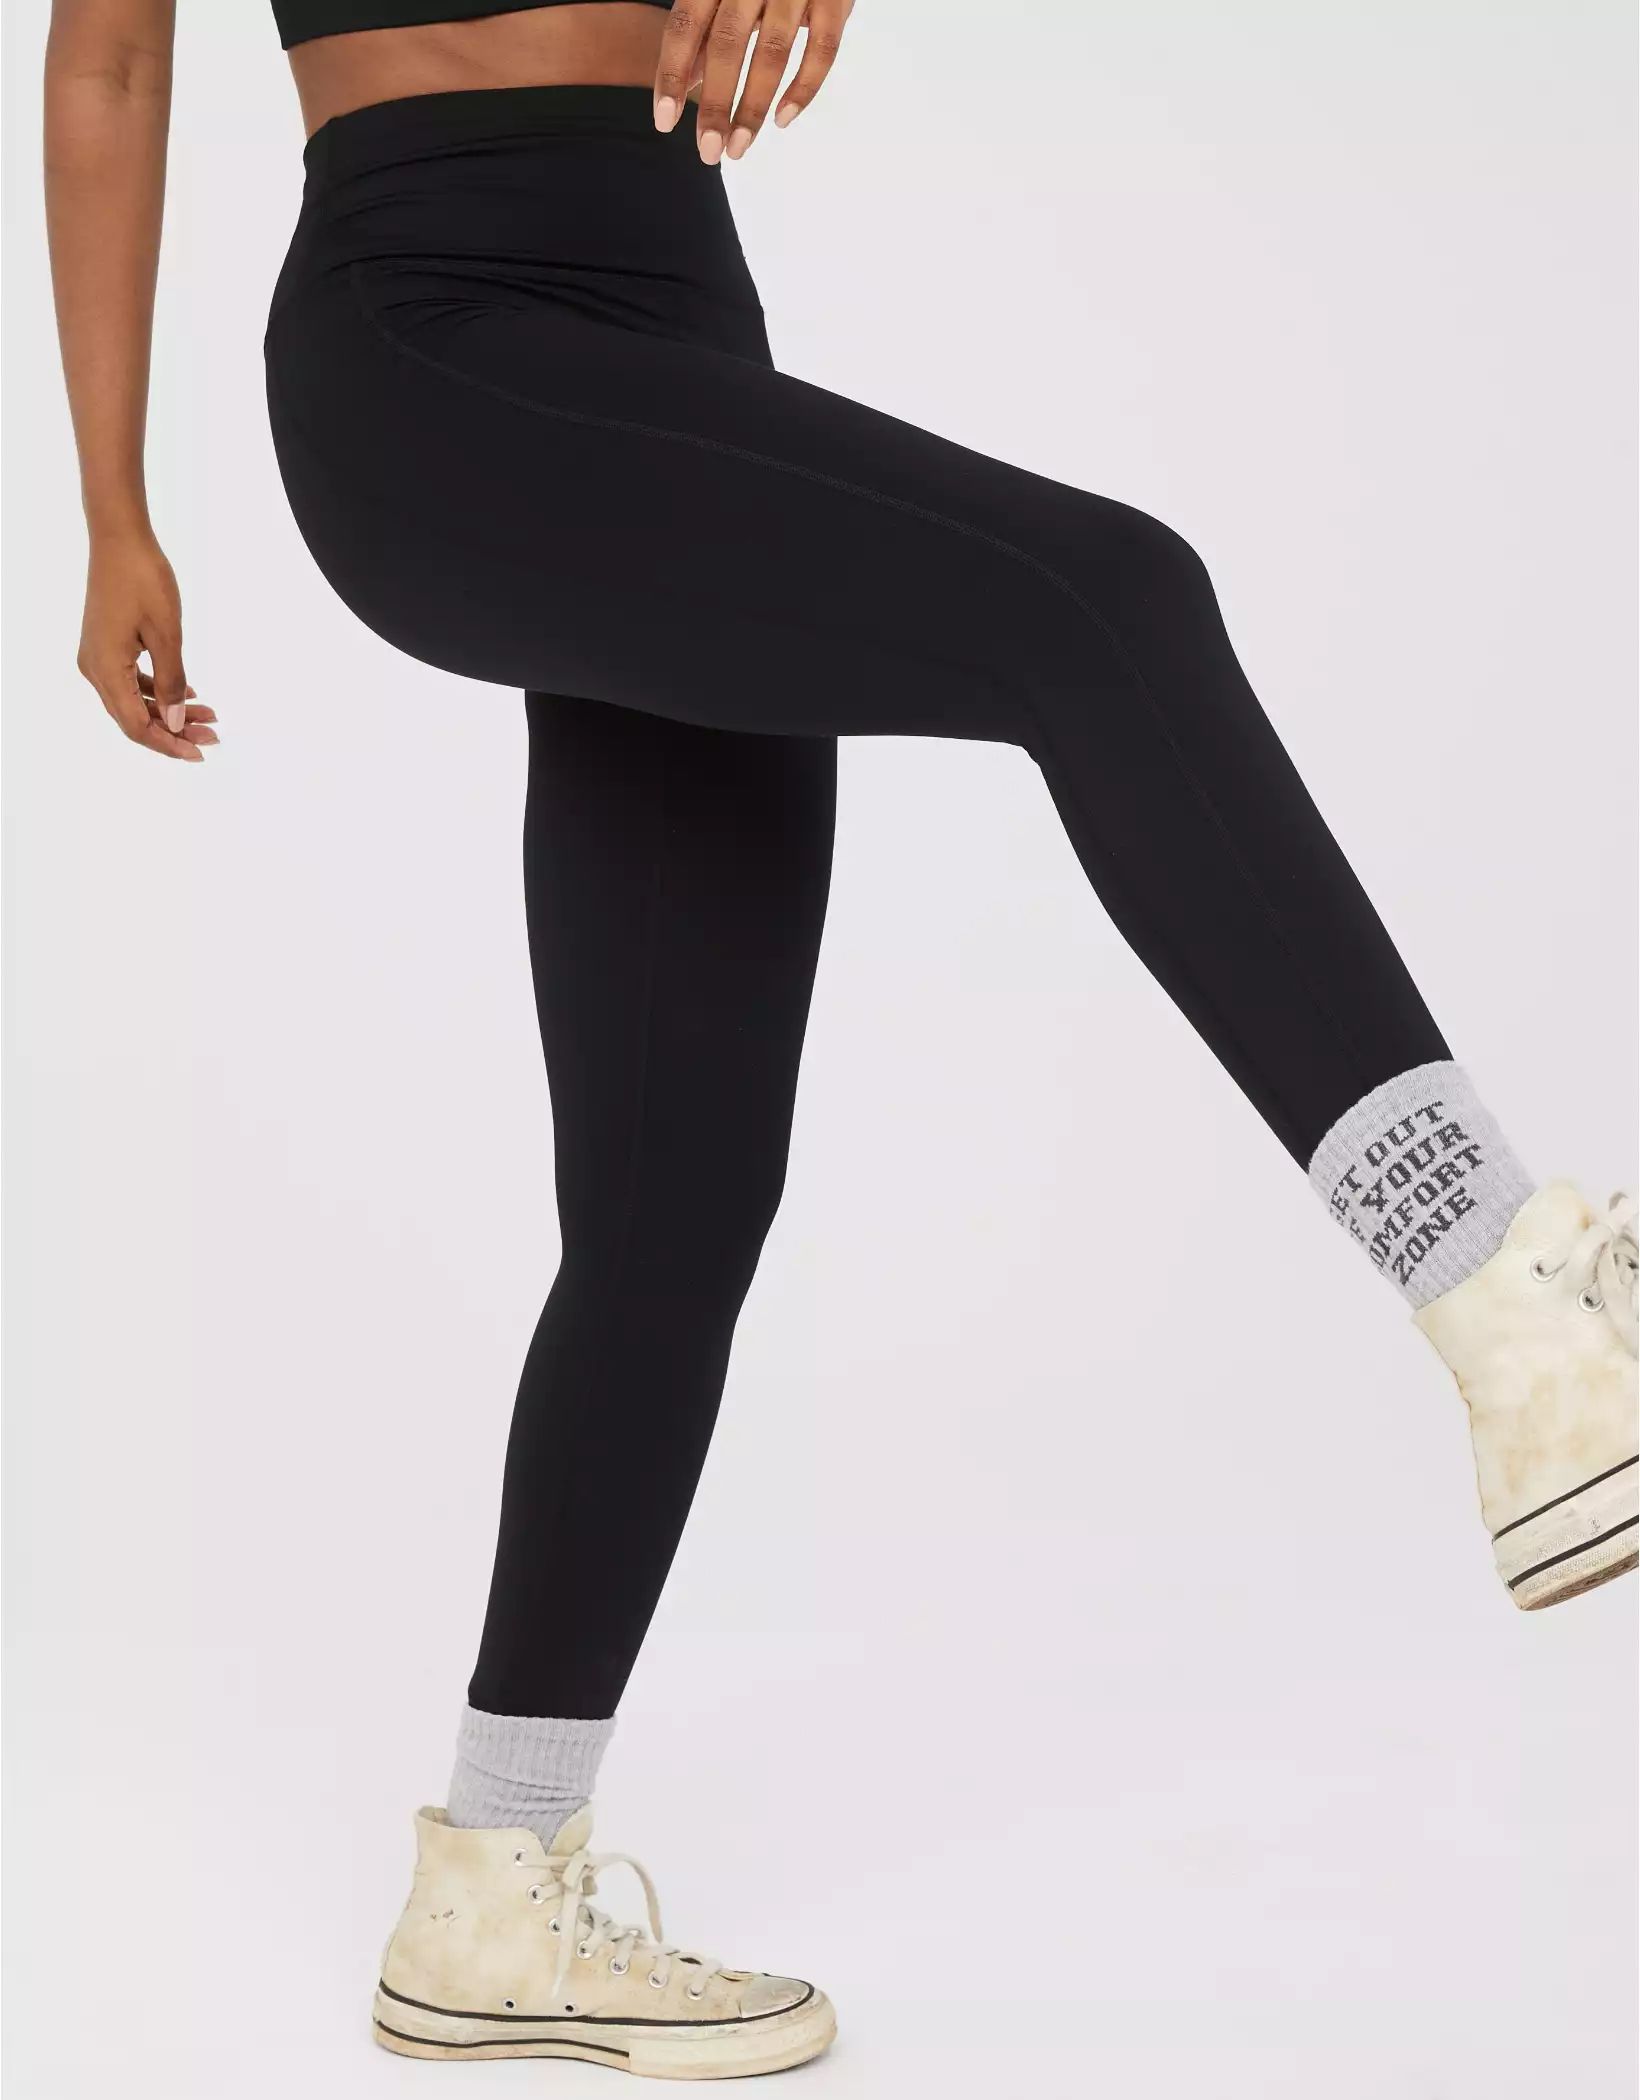 OFFLINE By Aerie Warmup High Waisted Legging | Aerie